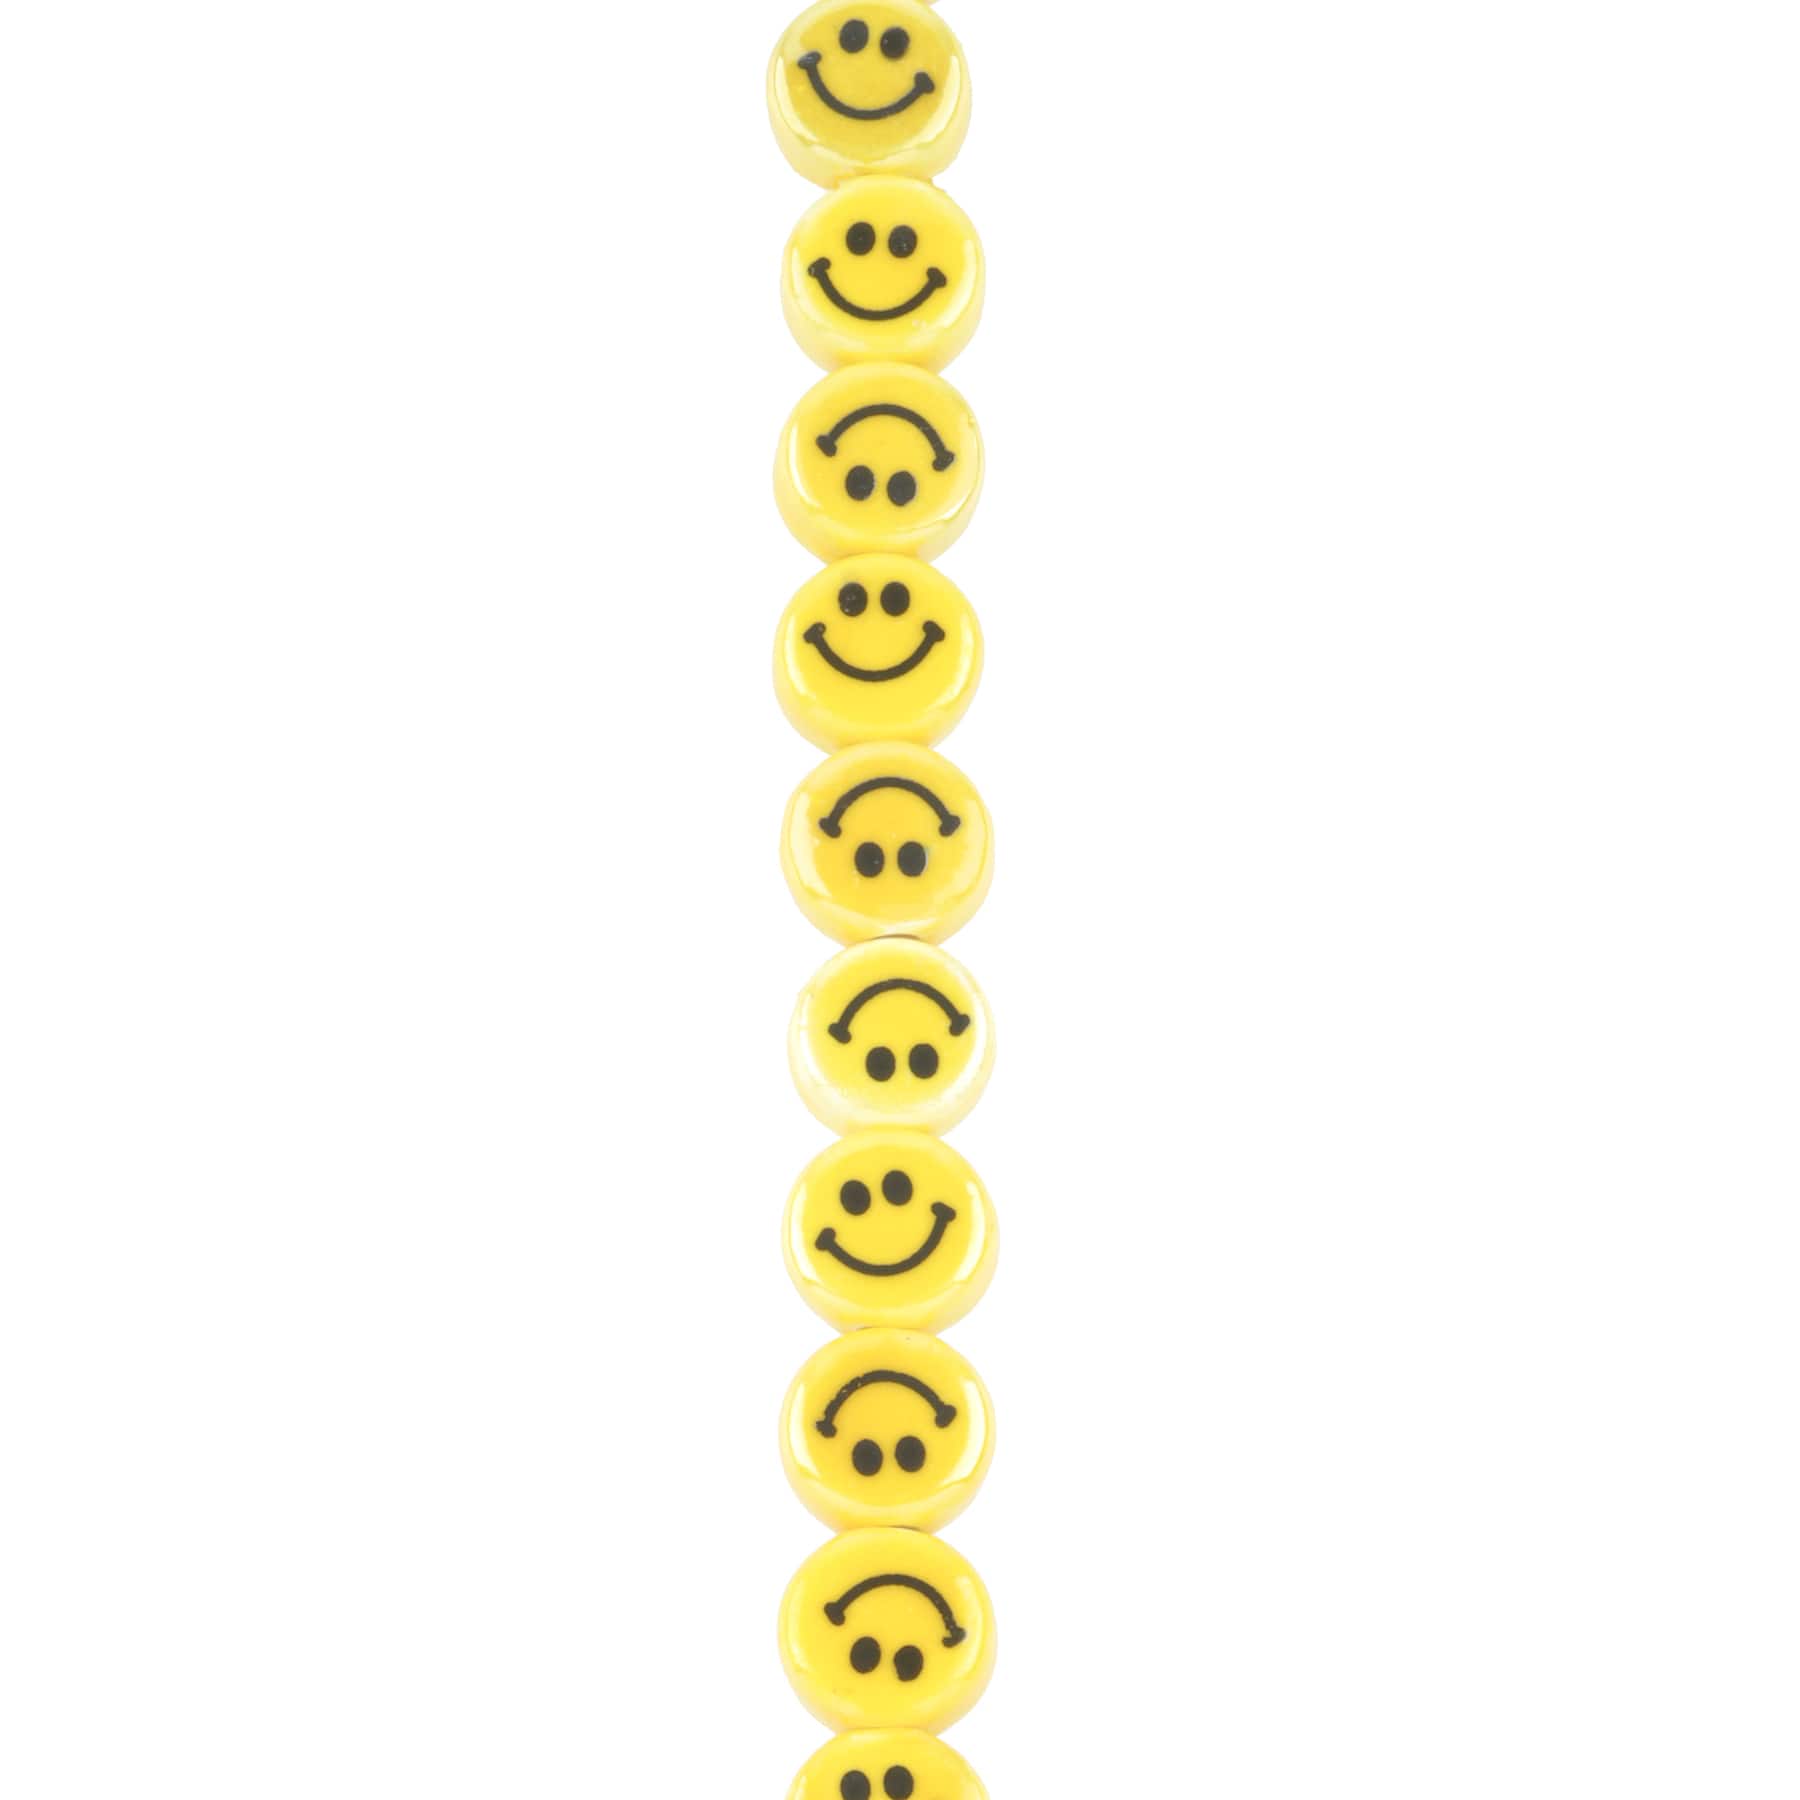 Smiley Face Beads, Emoji Beads, 10mm Polymer Clay Beads, Yellow